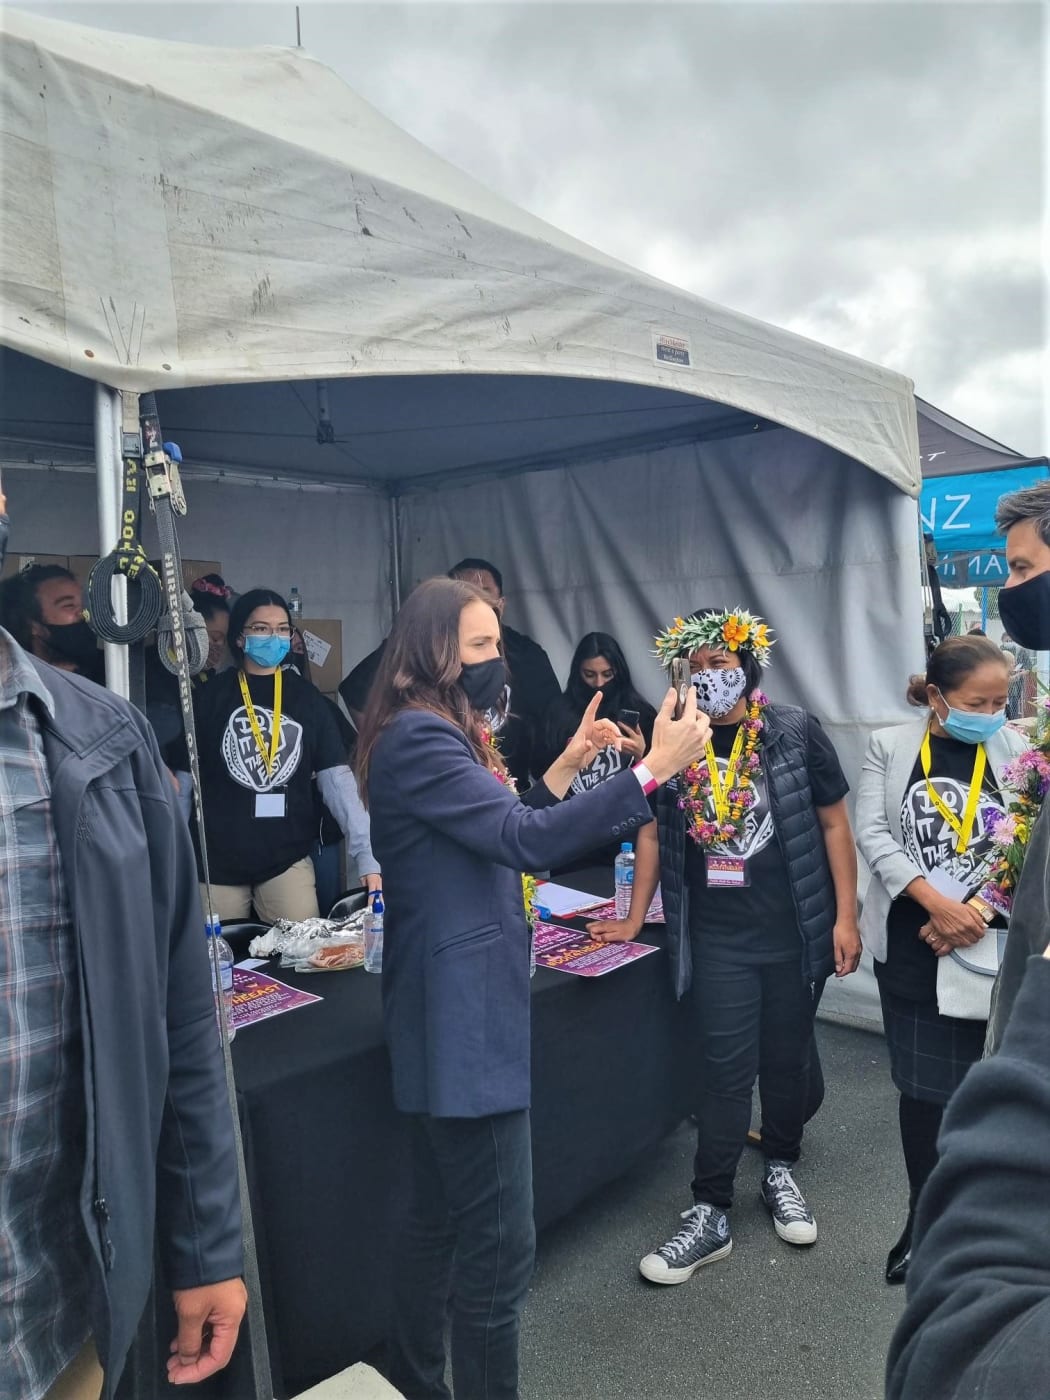 Prime Minister Jacinda Ardern taking a selfie with some of the organizers of ‘Do it 4 the East’, a youth-led vaccination event in Porirua.